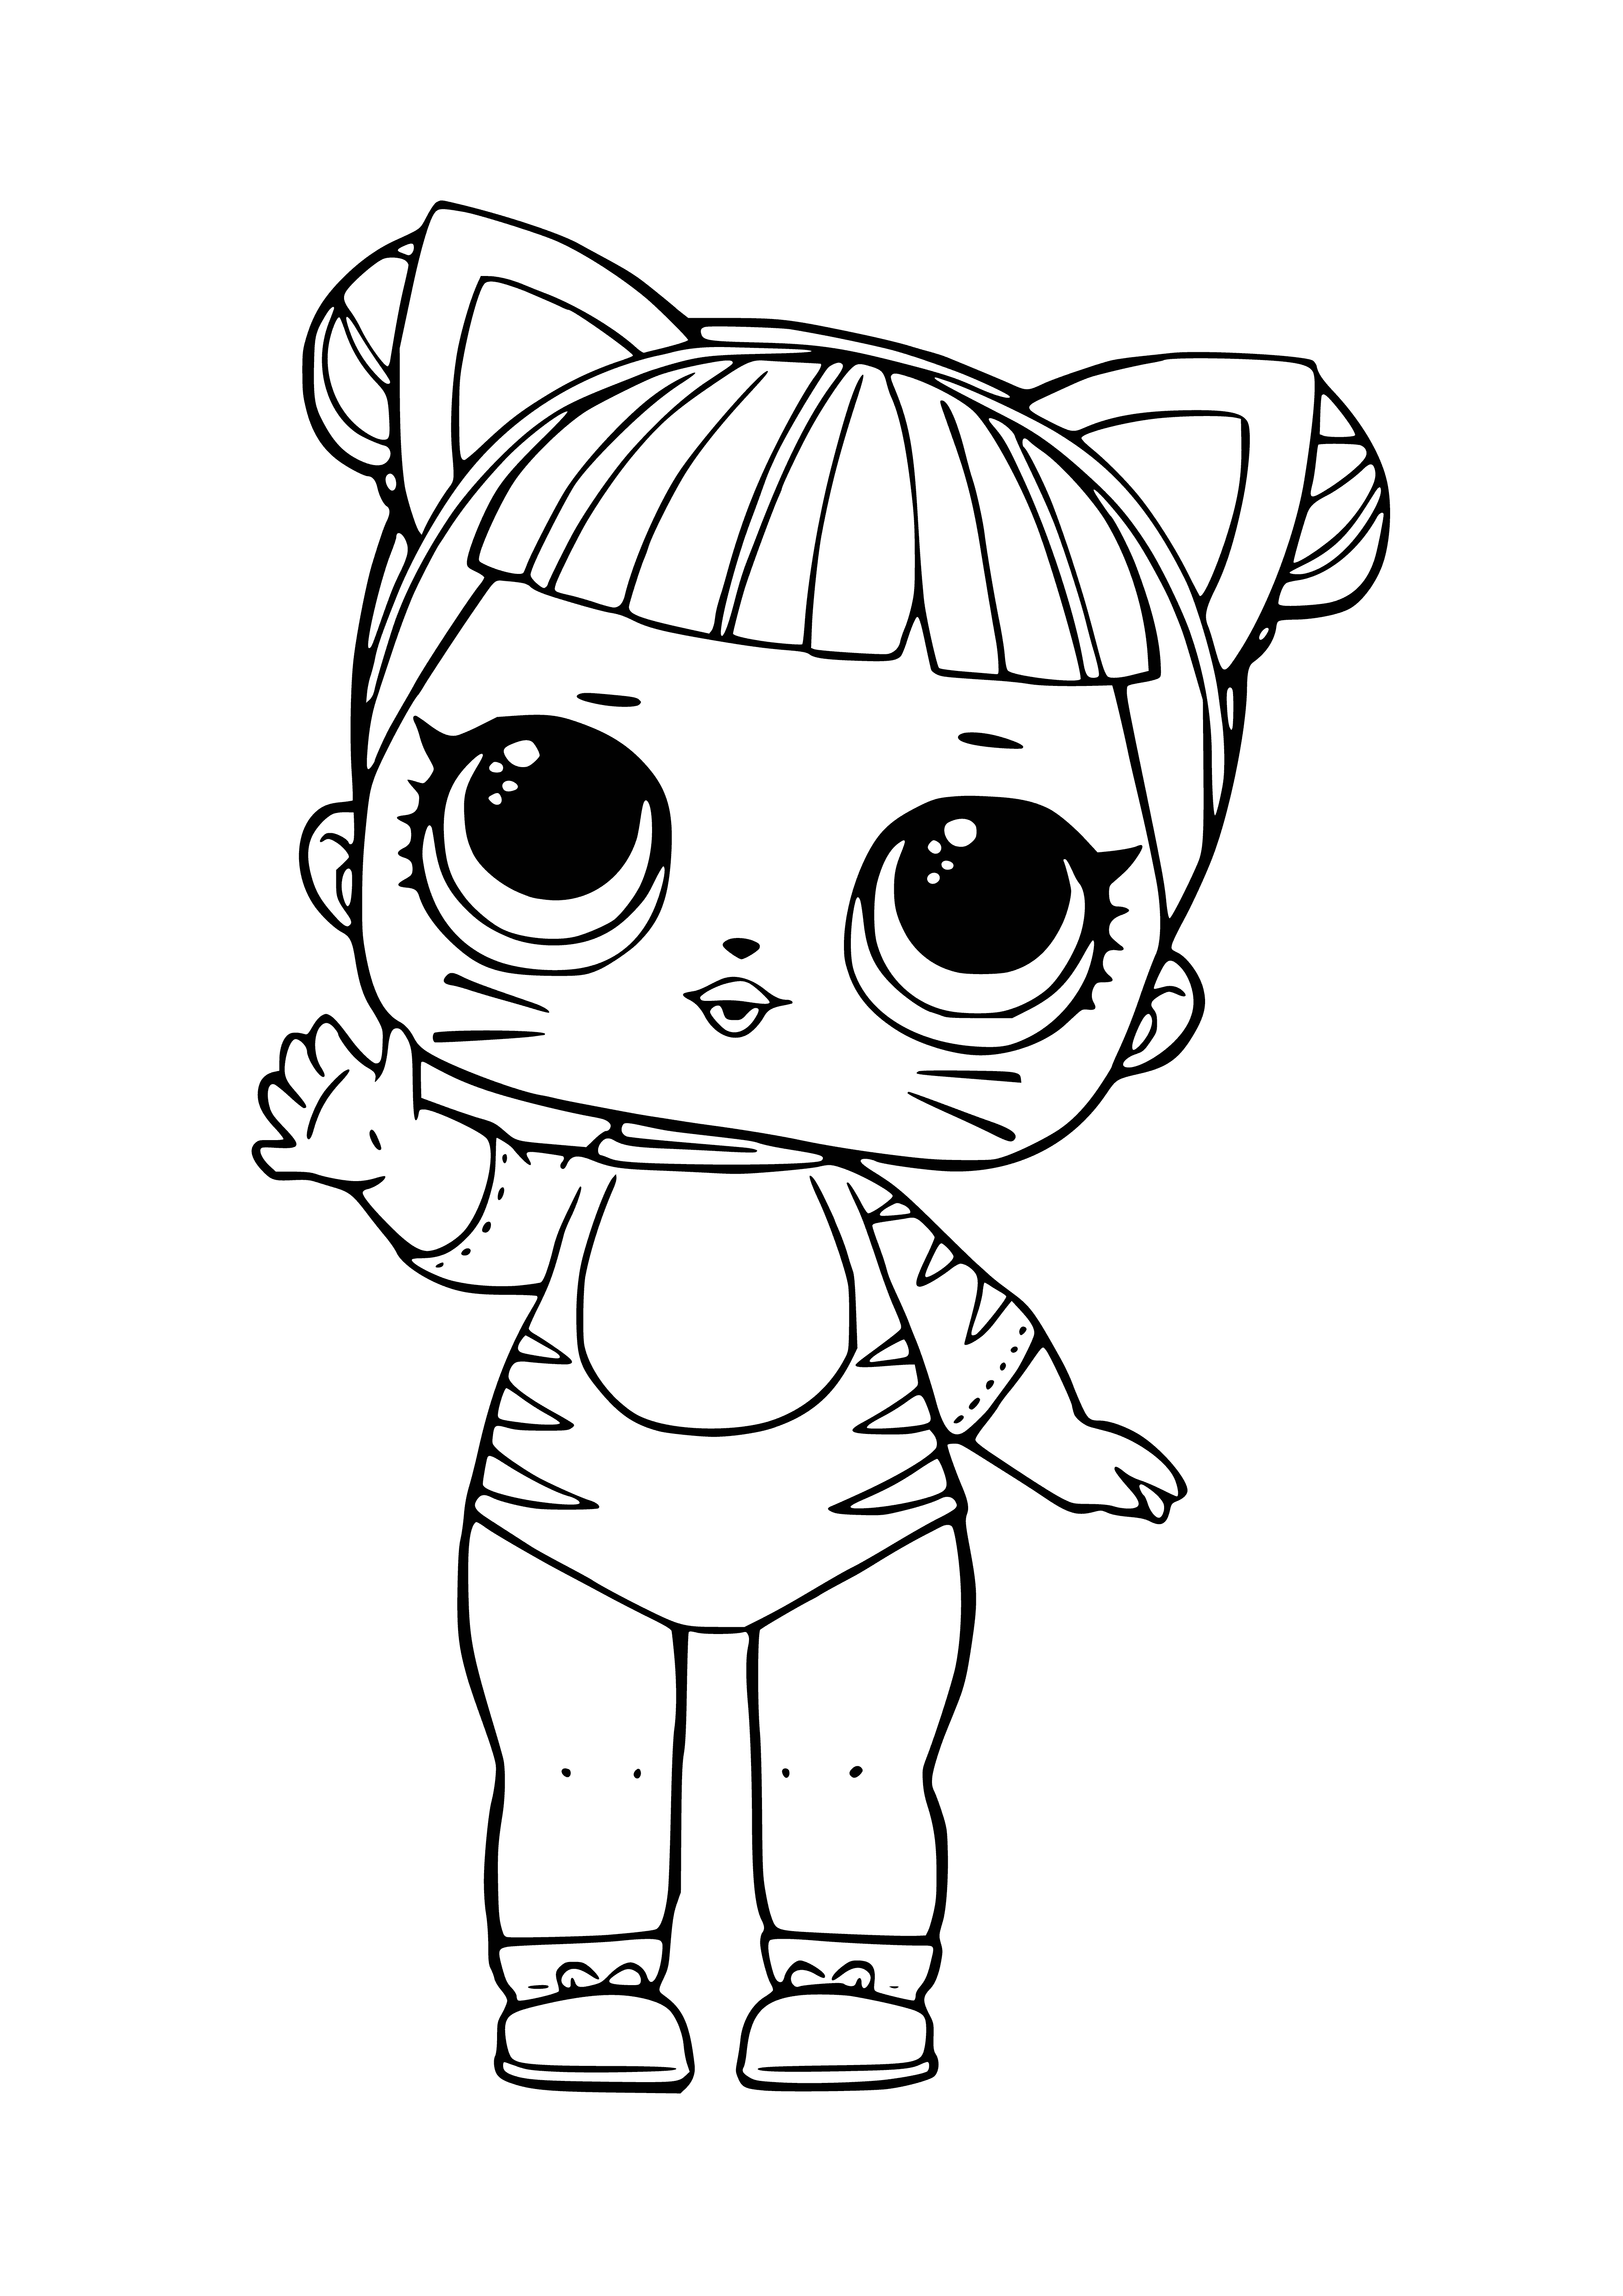 coloring page: Adorable doll kitten that makes a perfect cuddle buddy with its cuteness & fluffiness. Perfect gift for any cat lover. #cat #doll #kitten #gift